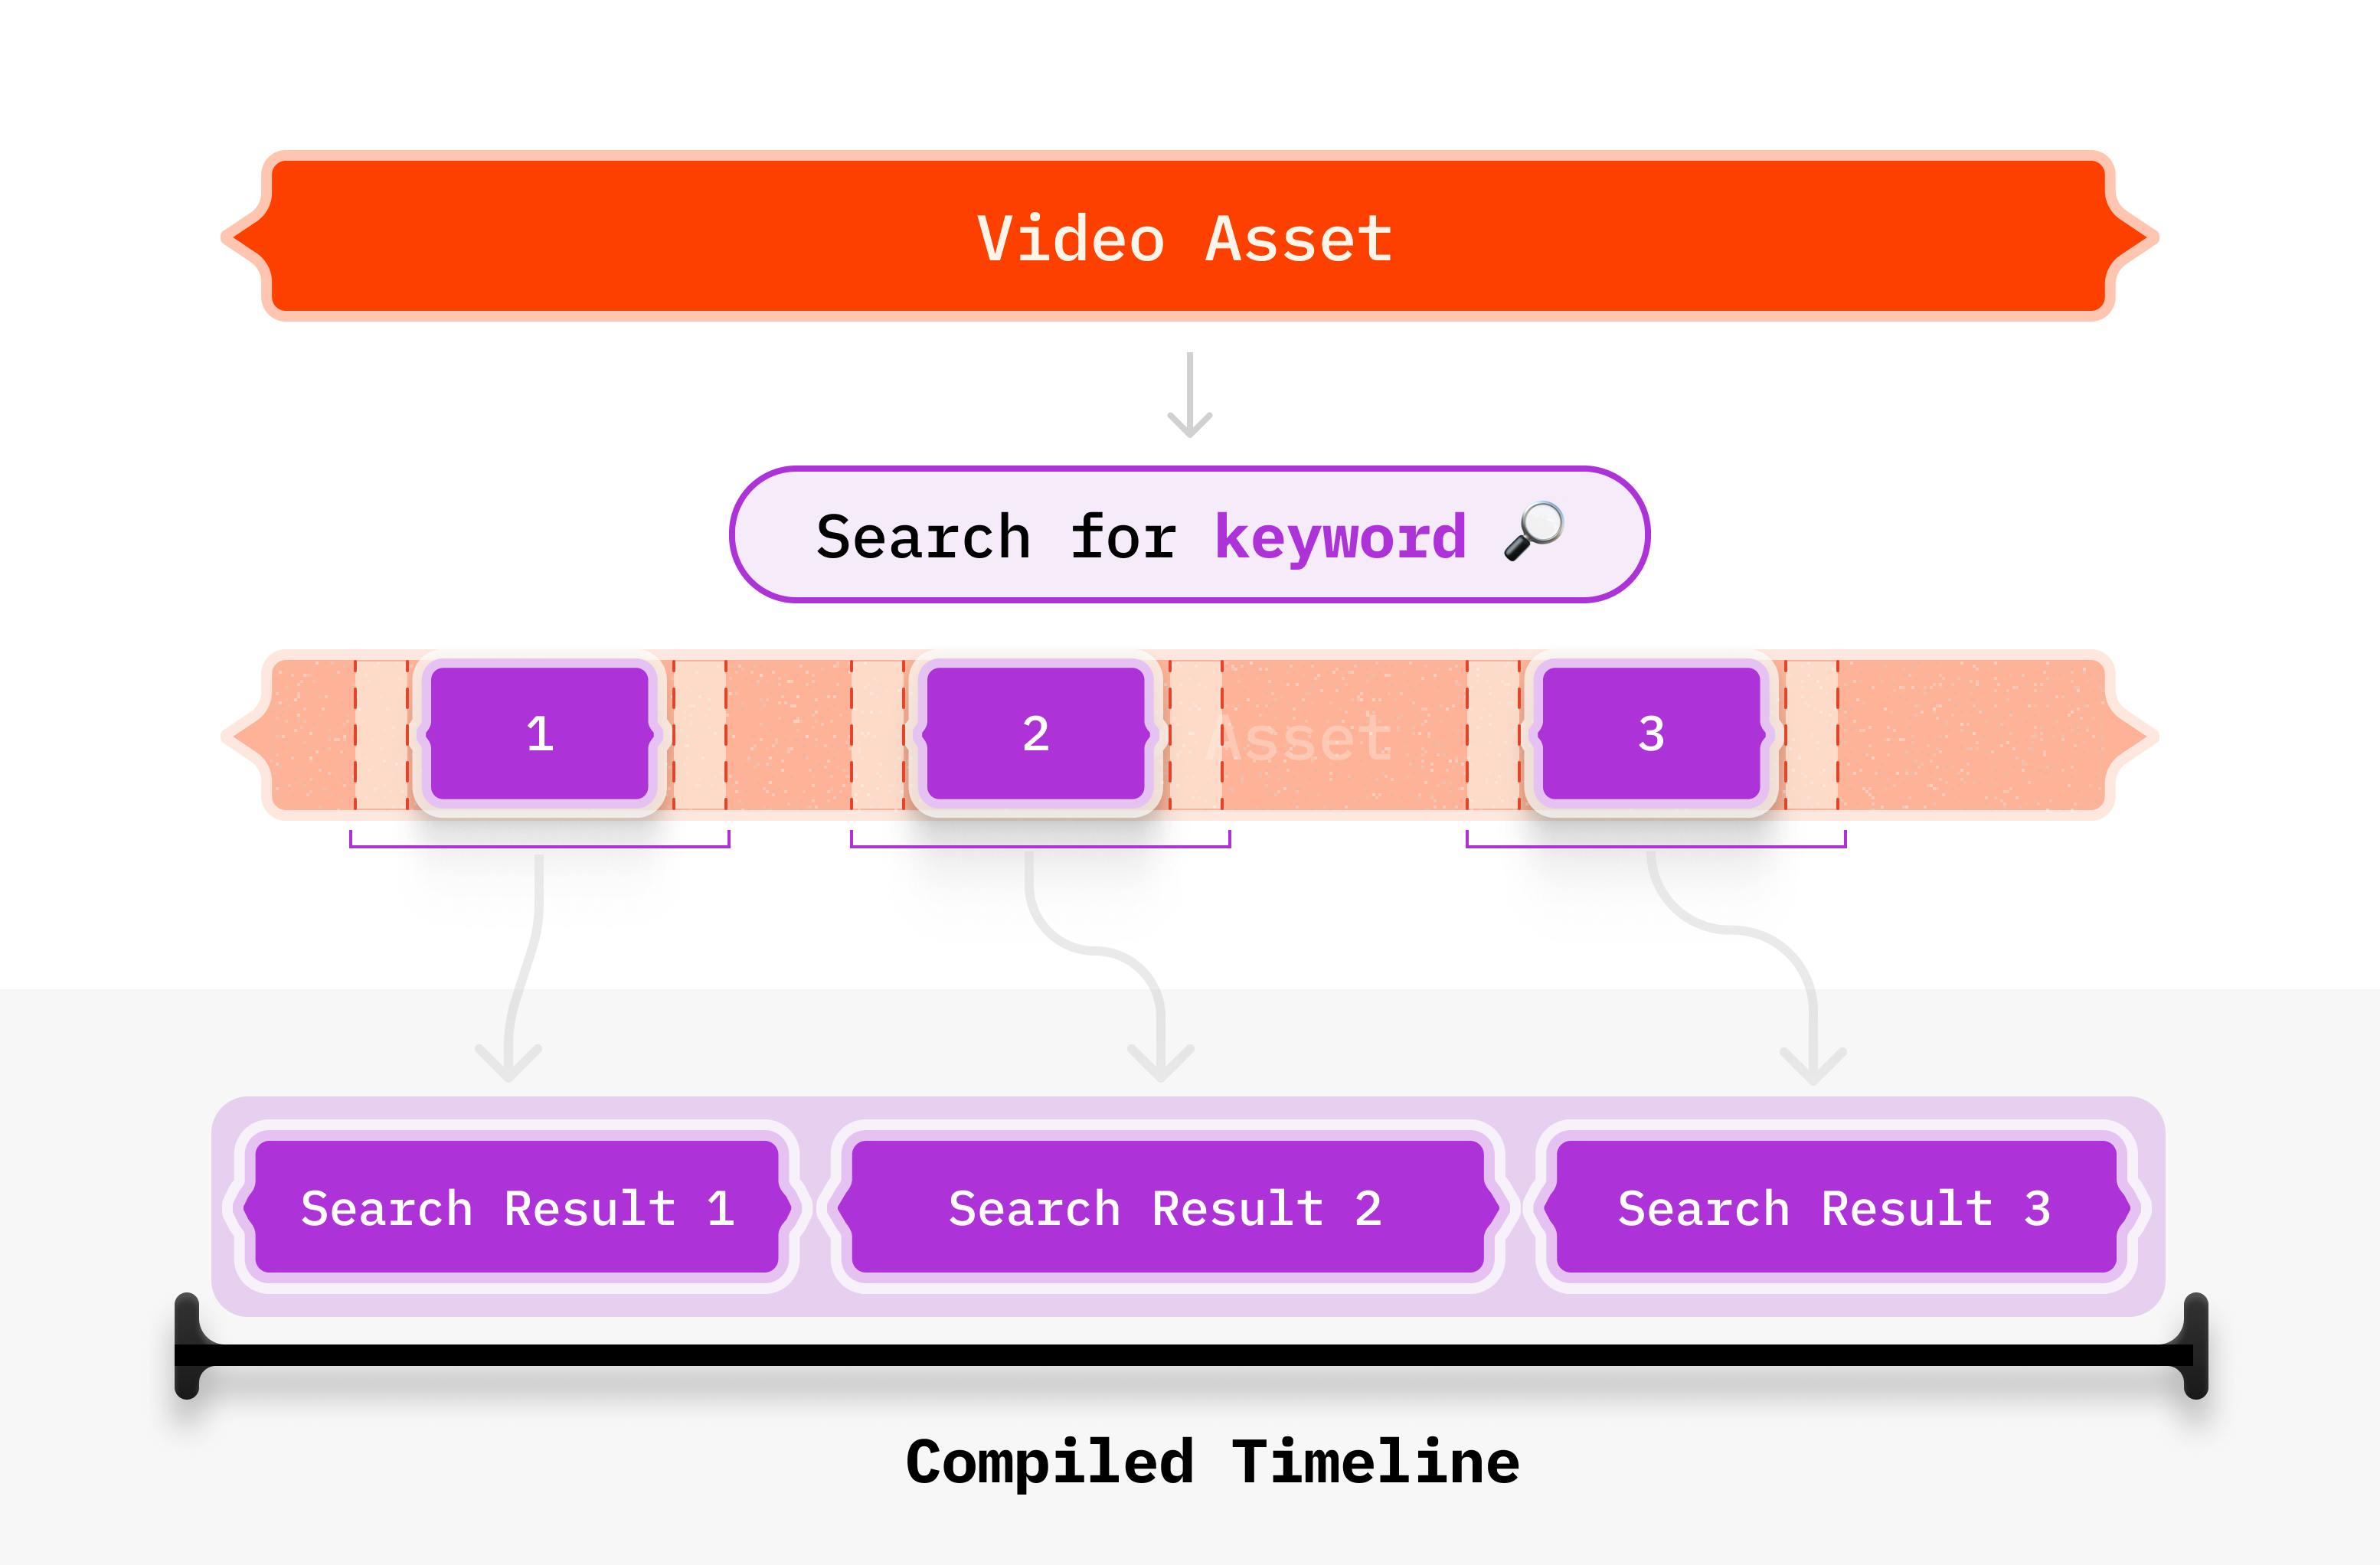 Compiled Timeline_Keyword-with padding.png